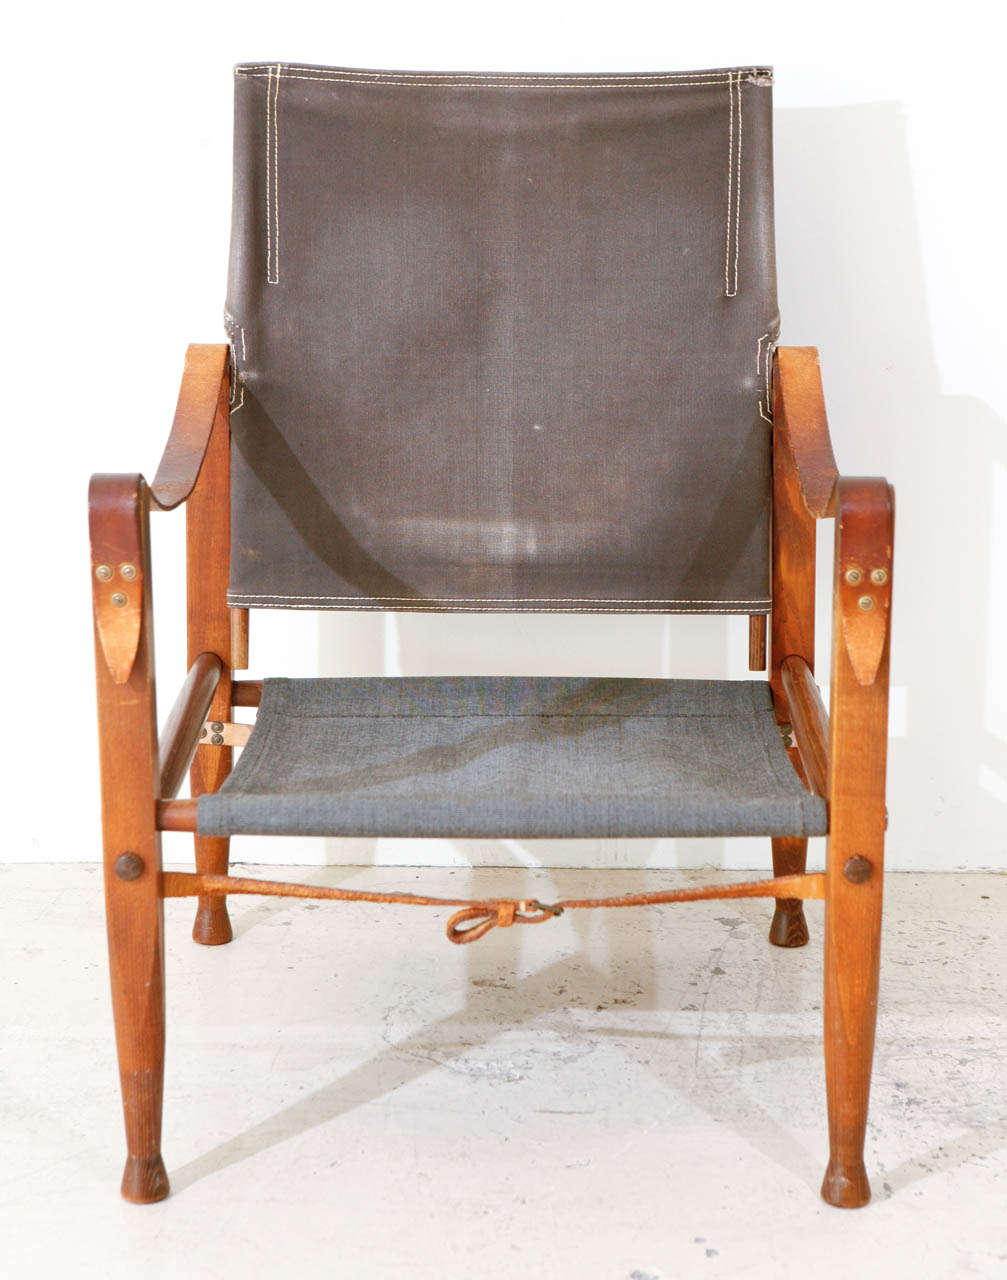 Safari chair by Kaare Klint. Made by Rud Rassman Denmark. Dark ash frames with original canvas seat and pivoting back and original leather arm straps.